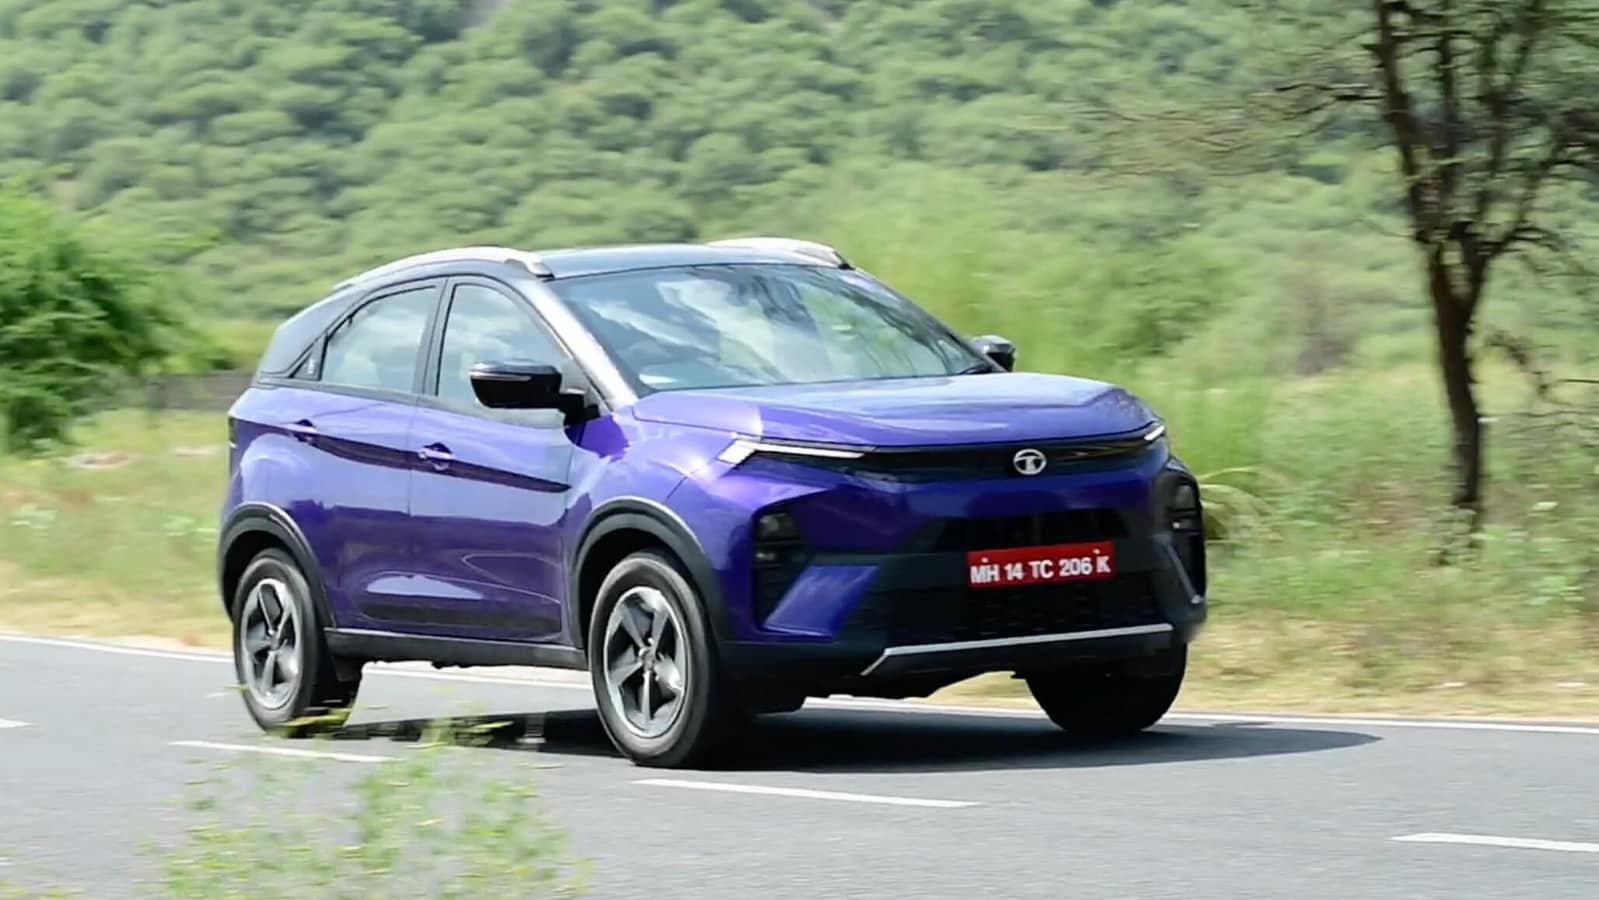 2023 Tata Nexon diesel prices revealed. Check out the variant-wise price list